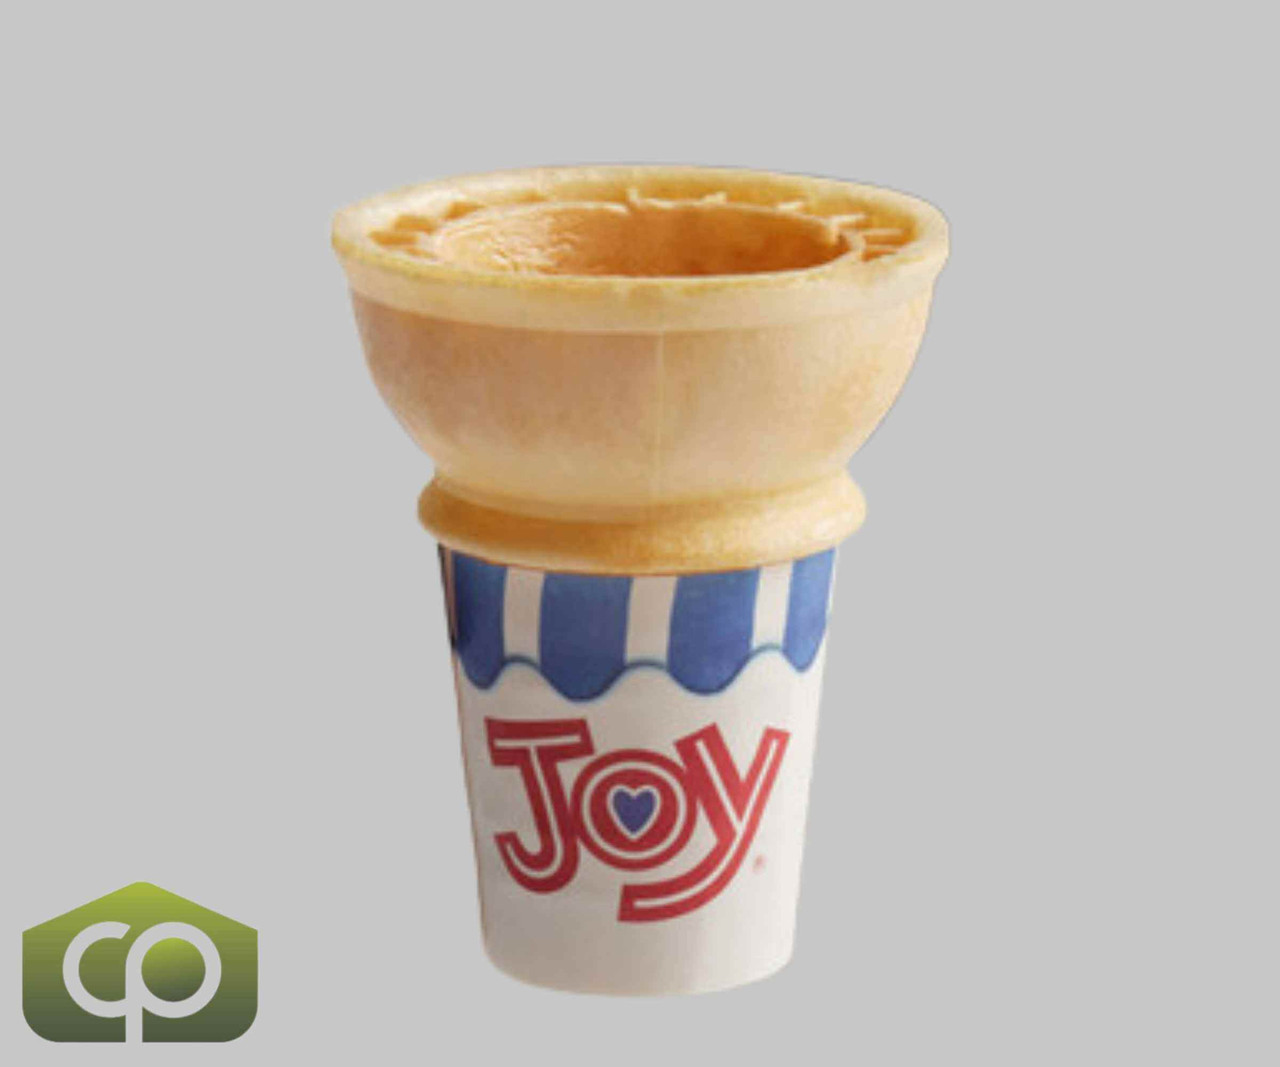 JOY #10 Flat Bottom Jacketed Cake Cone - 720/Case for Sturdy and Insulated Ice Cream Delights